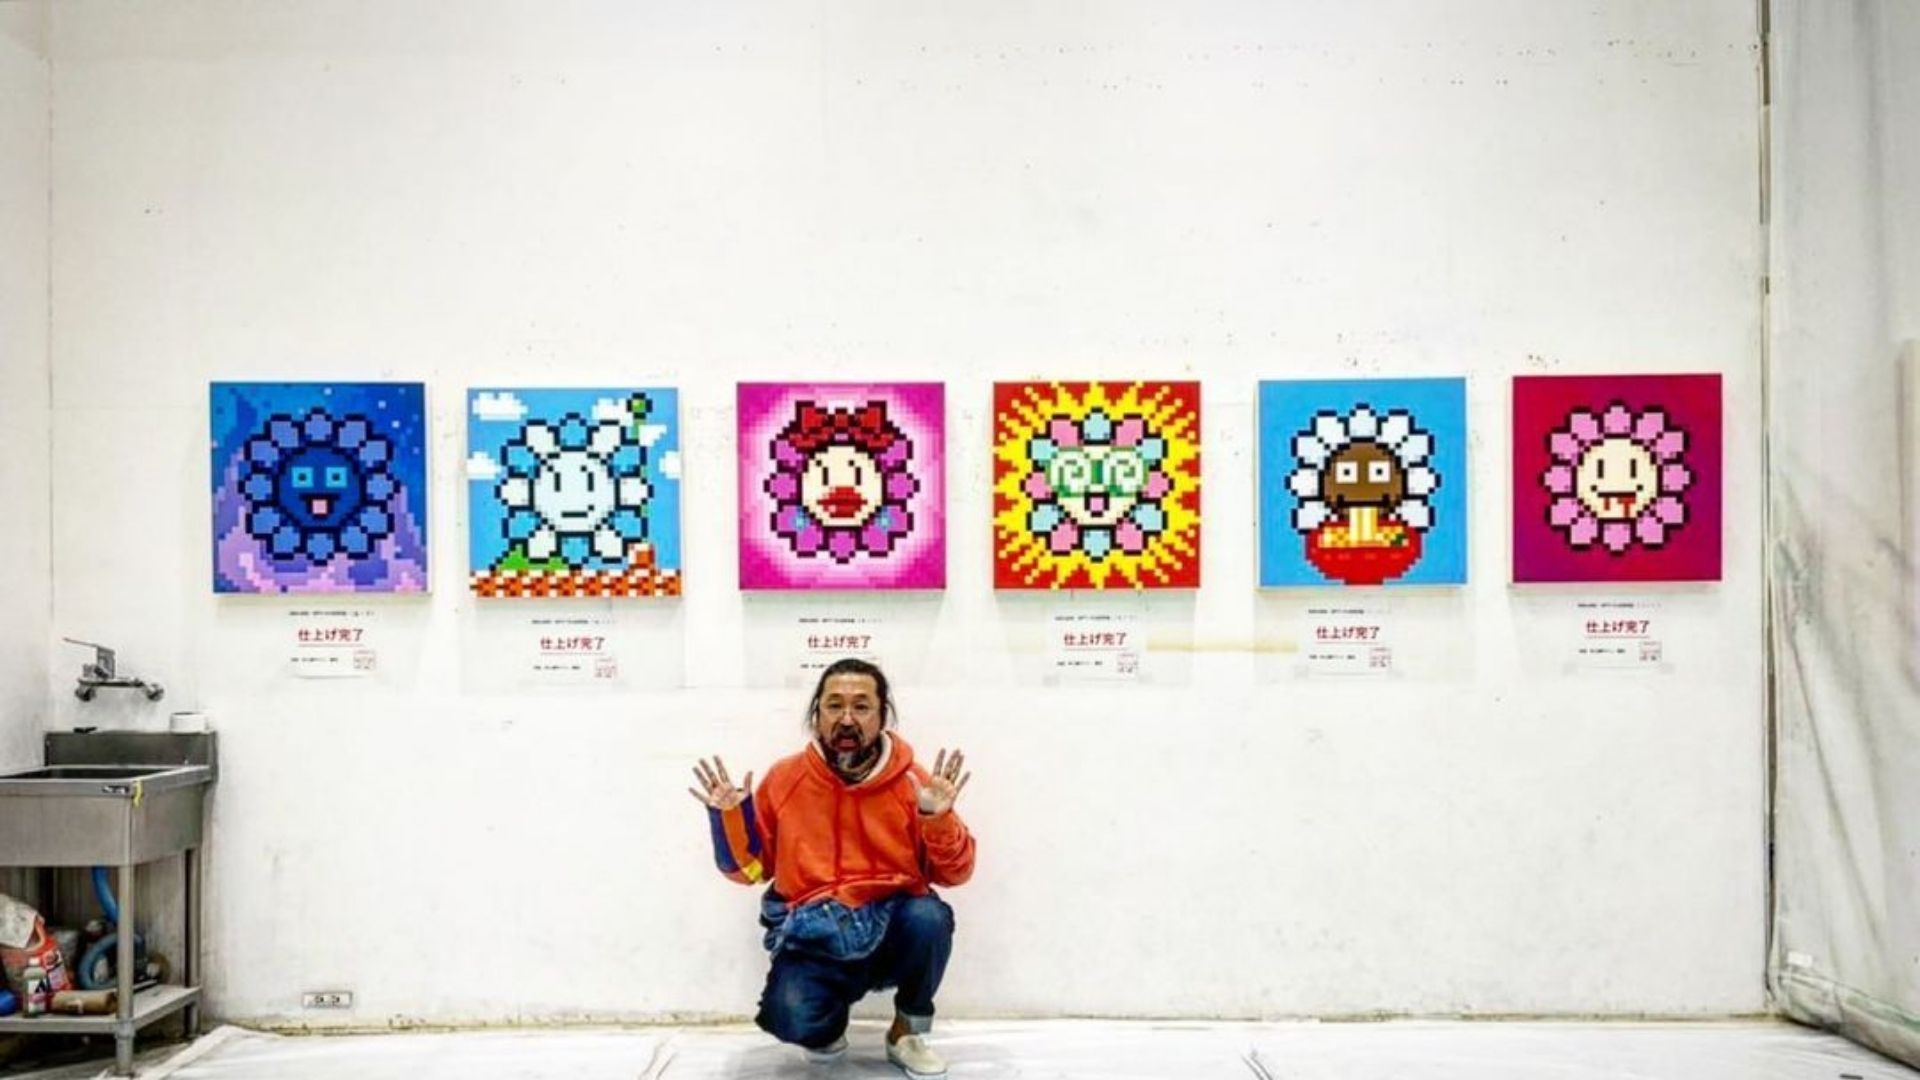 takashi murakami launches first-ever NFT — 108 variations of his